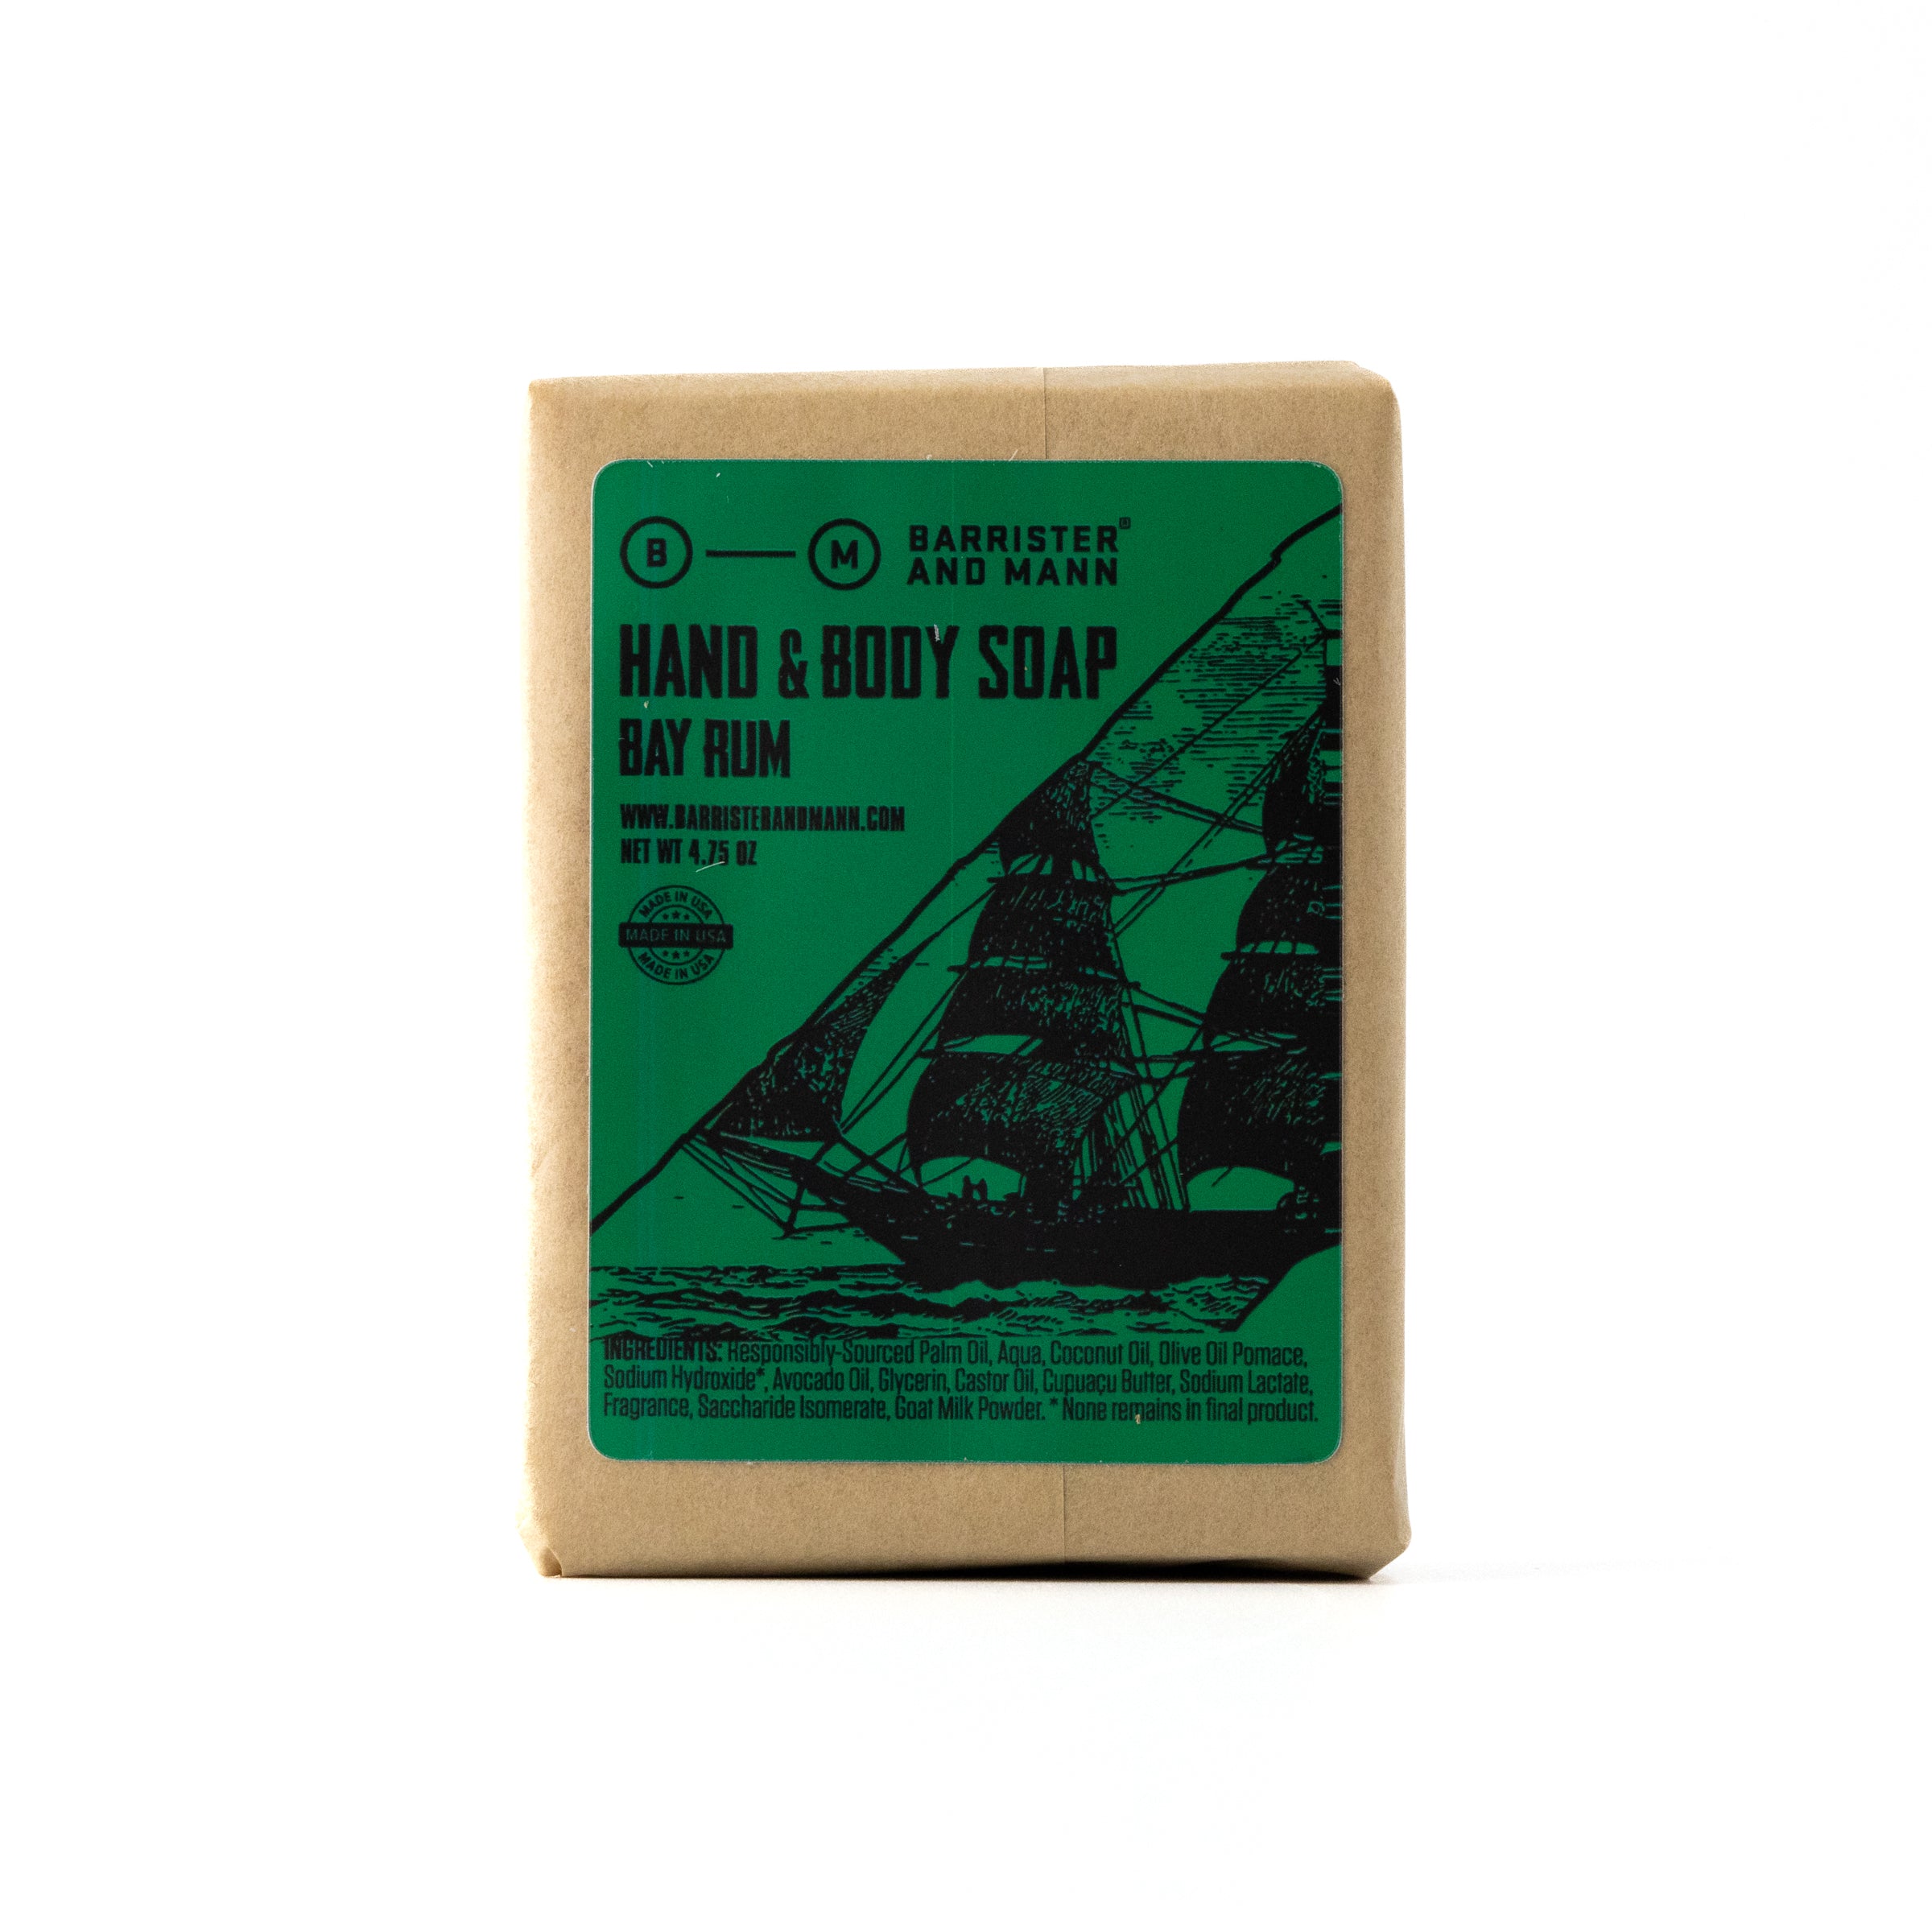 Hand &amp; Body Soap: Bay Rum - Barrister and Mann LLC